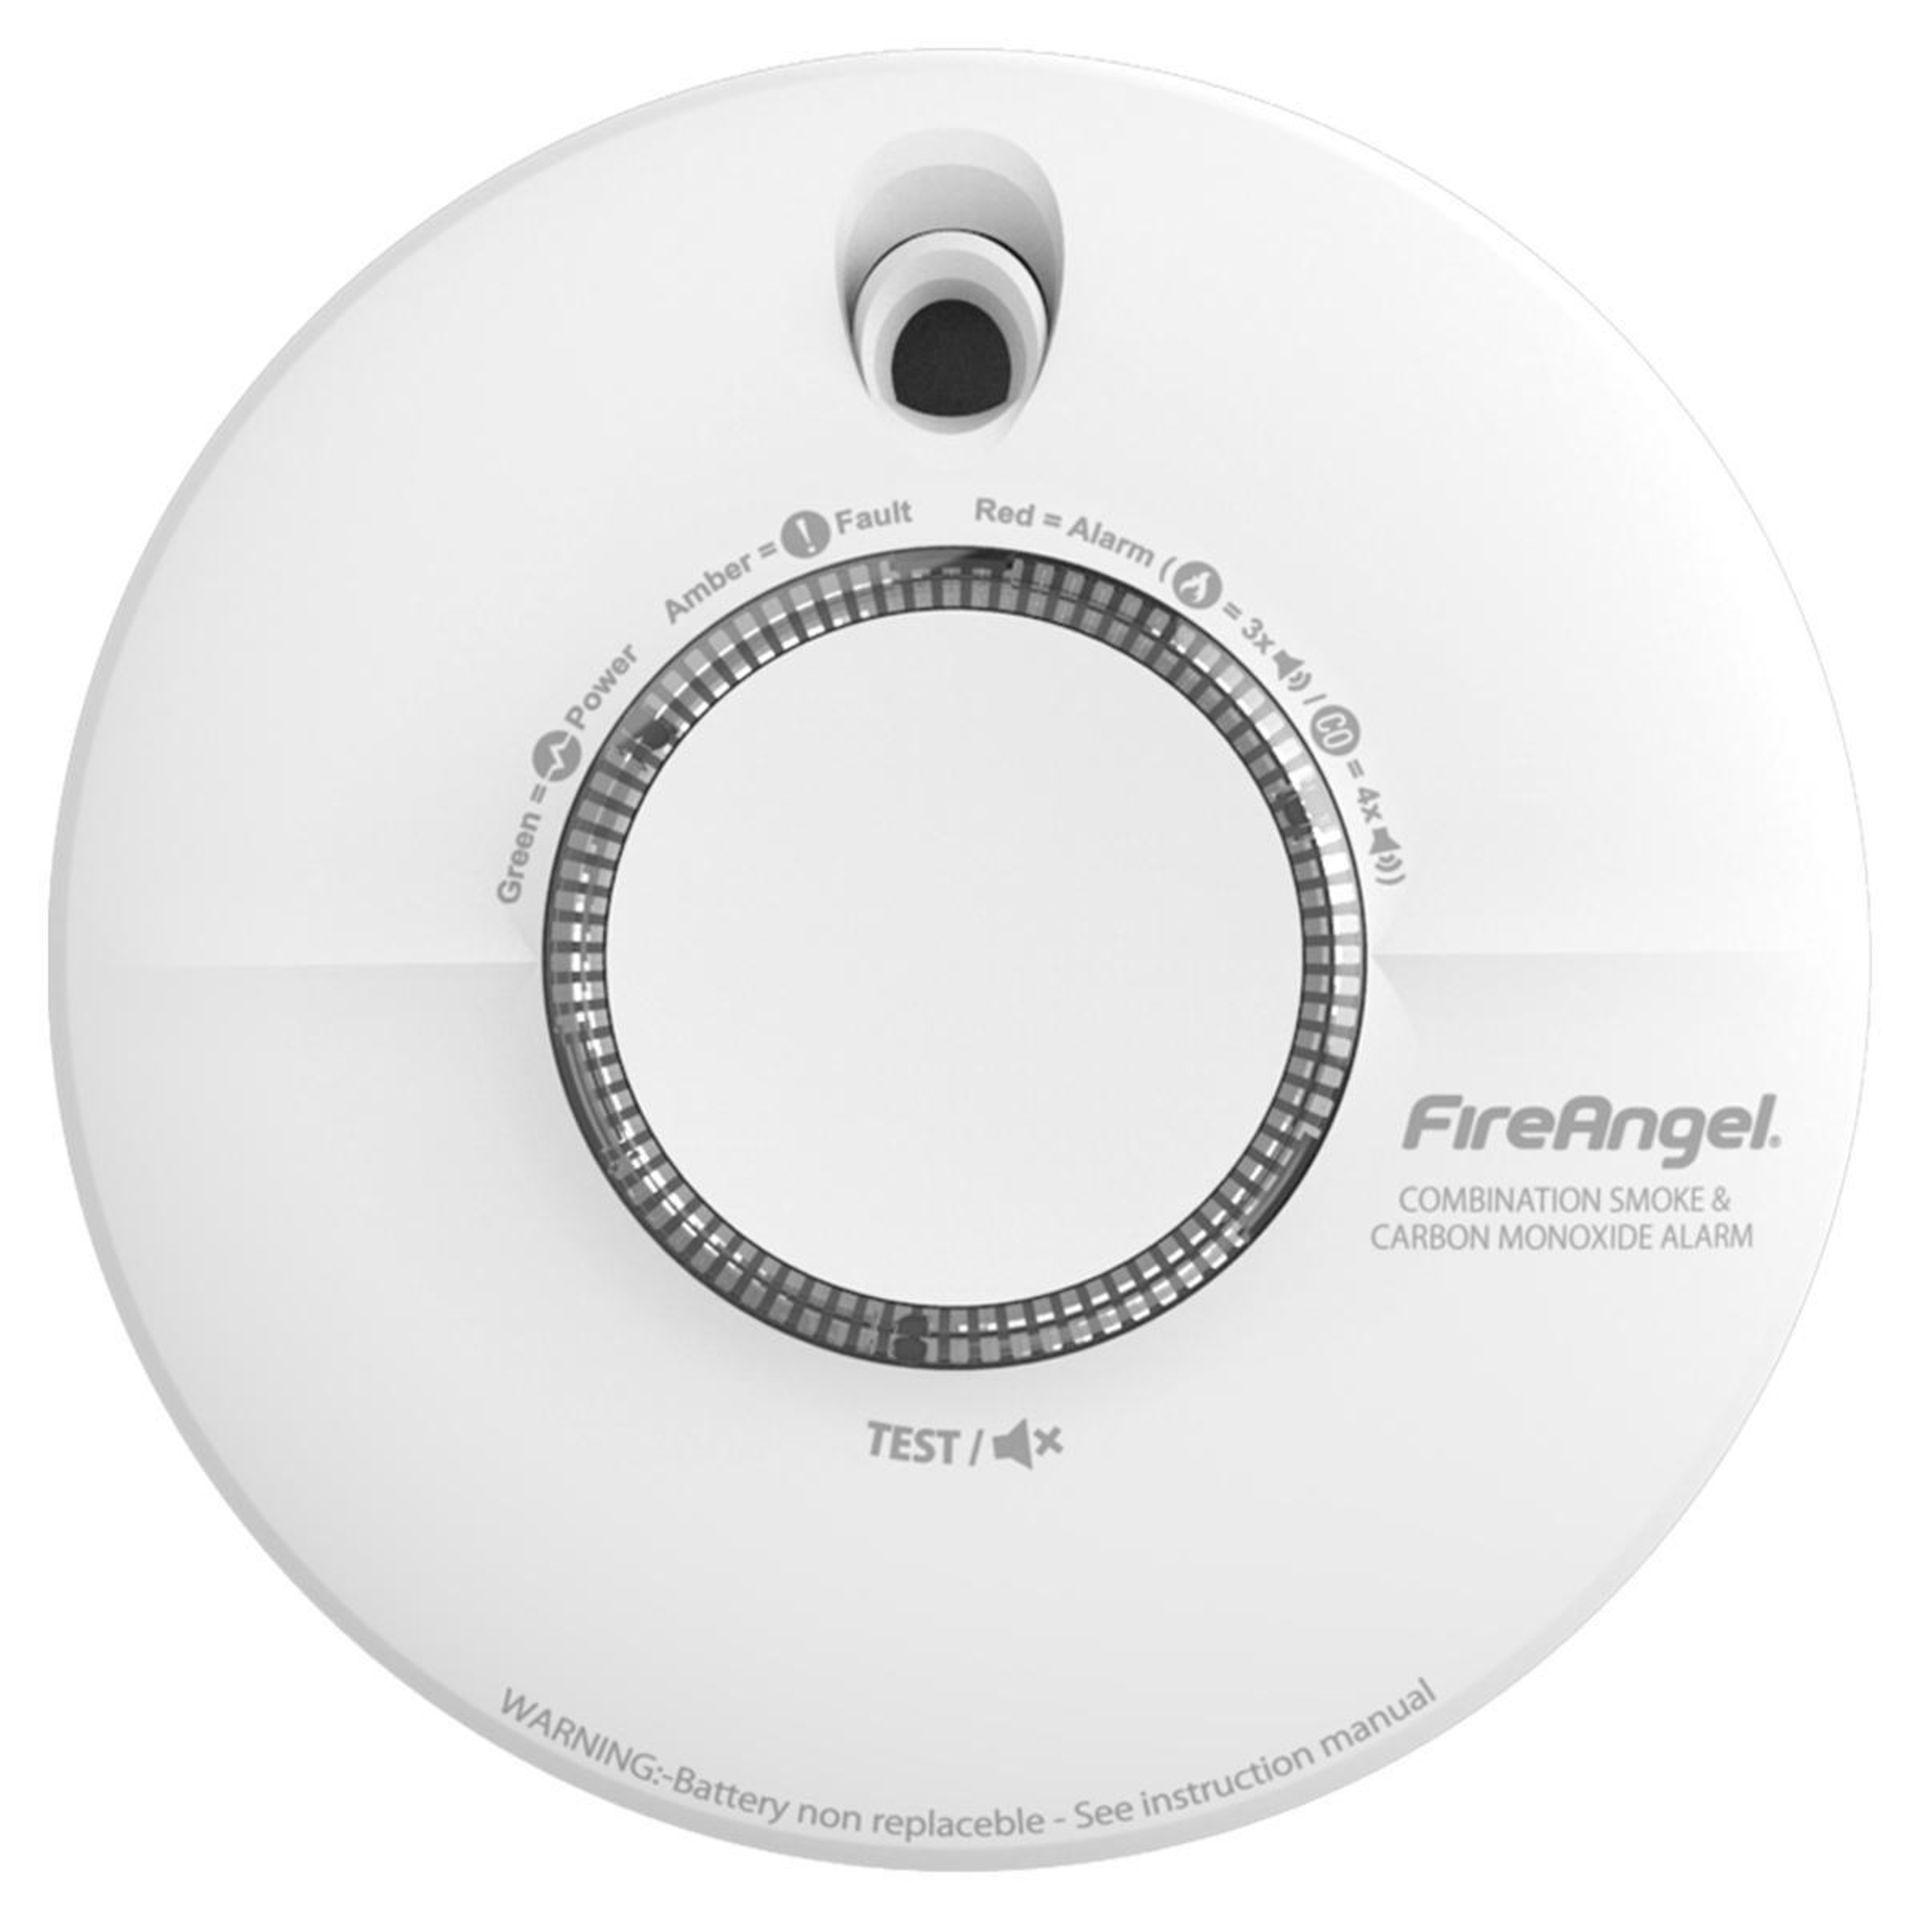 FireAngel Smoke and Carbon Monoxide Combination Alarm, 10 Year Battery - SCB10-R - SR44. Using the